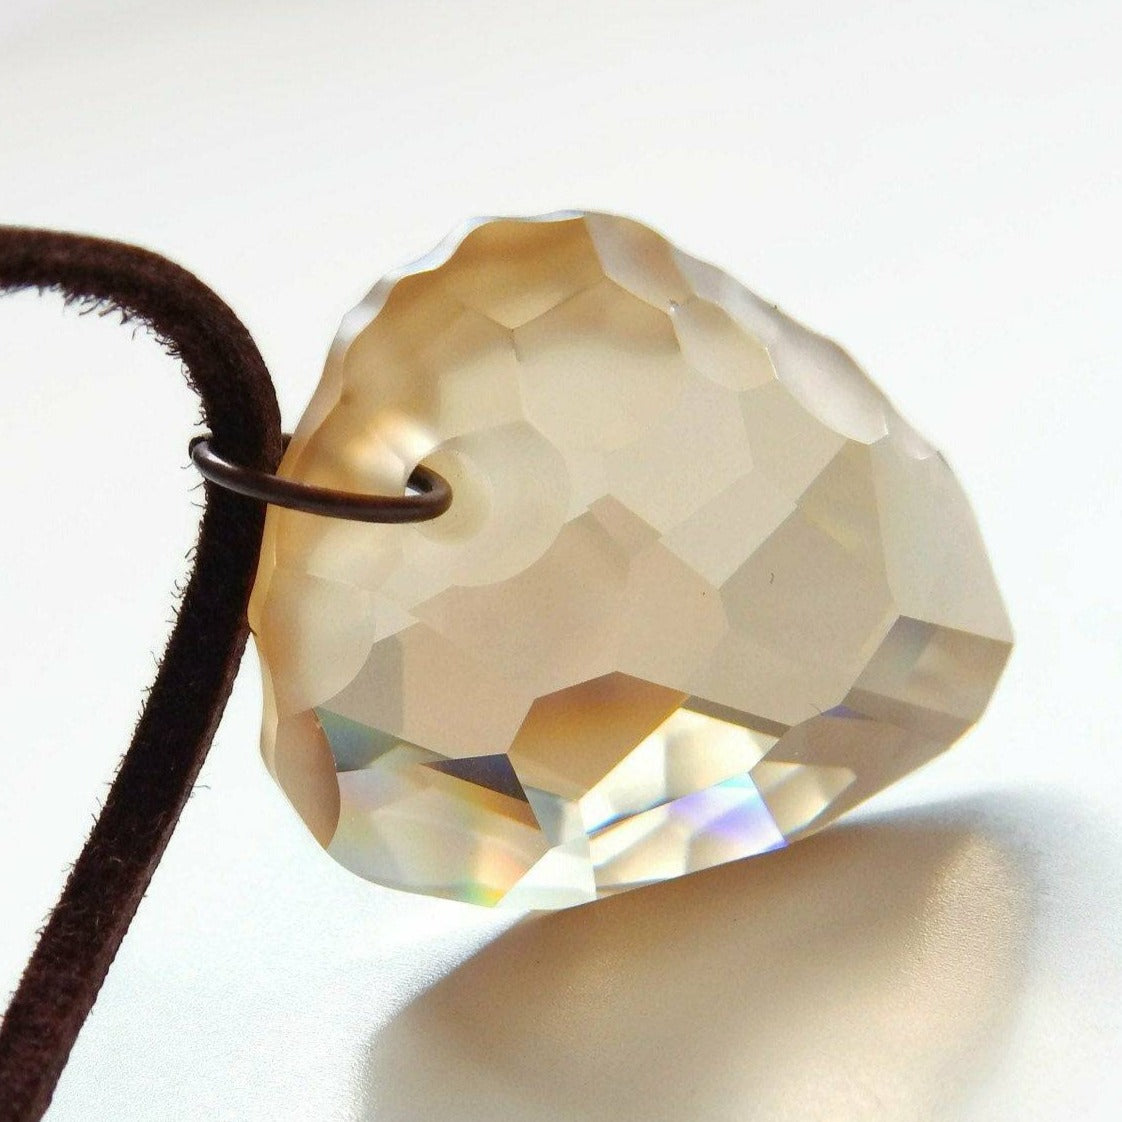 Golden rock crystal pendant on leather necklace